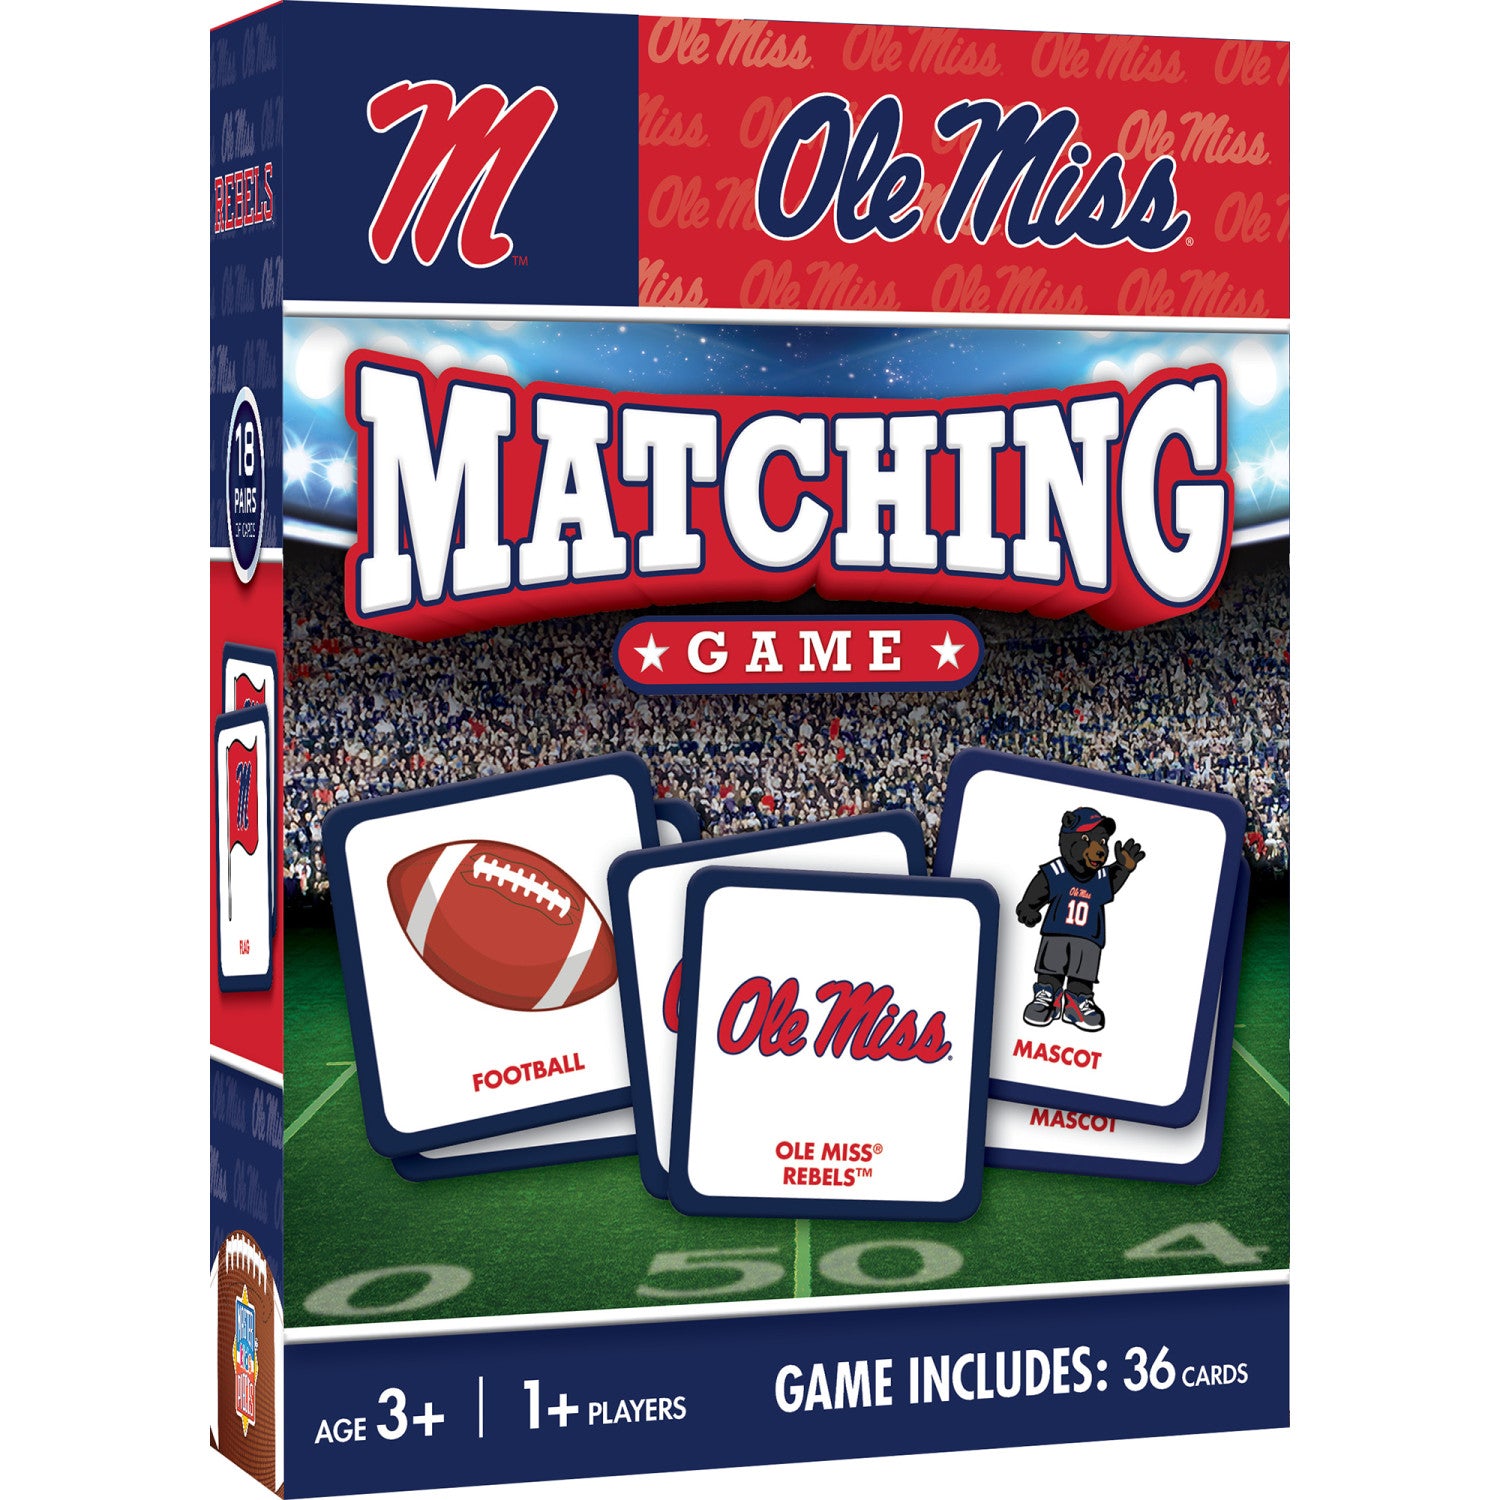 Ole Miss Rebels Matching Game